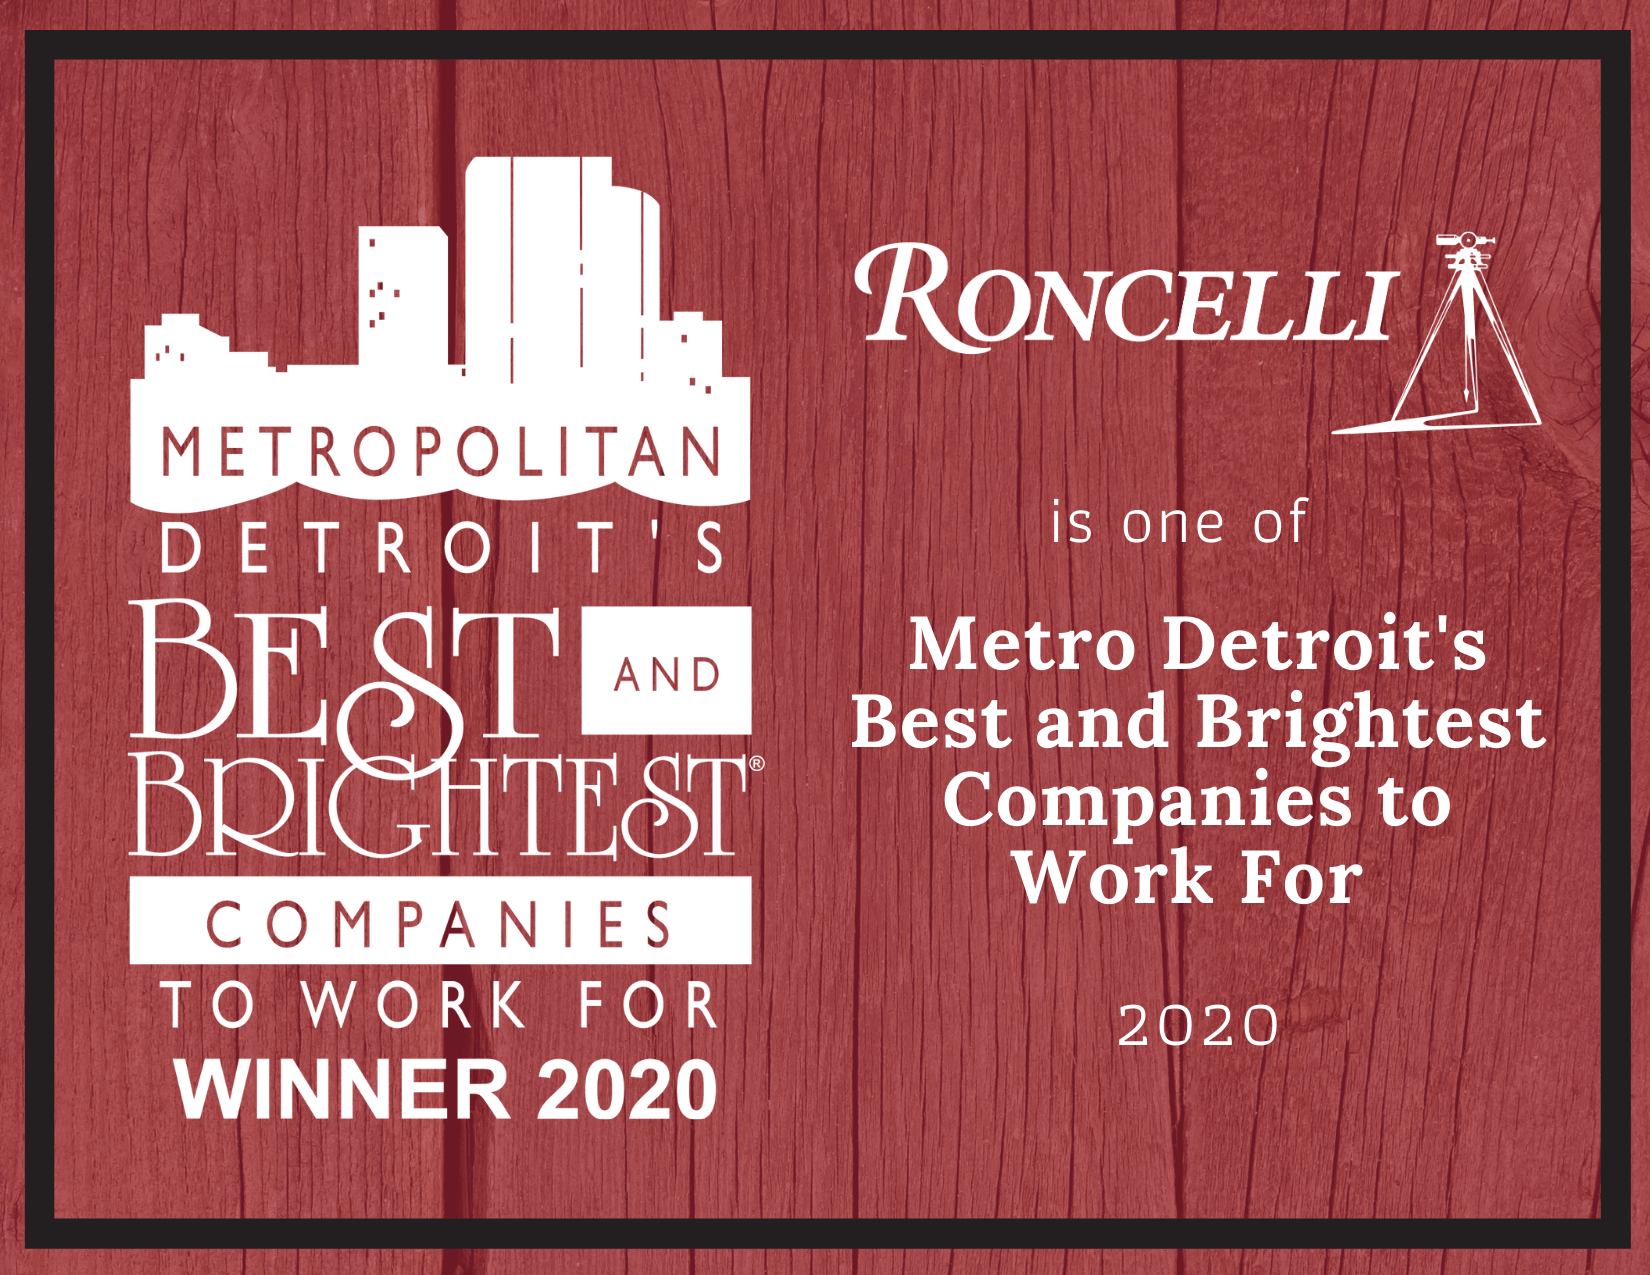 Roncelli, Inc. Named One of the Best and Brightest Companies to Work For in Metro Detroit